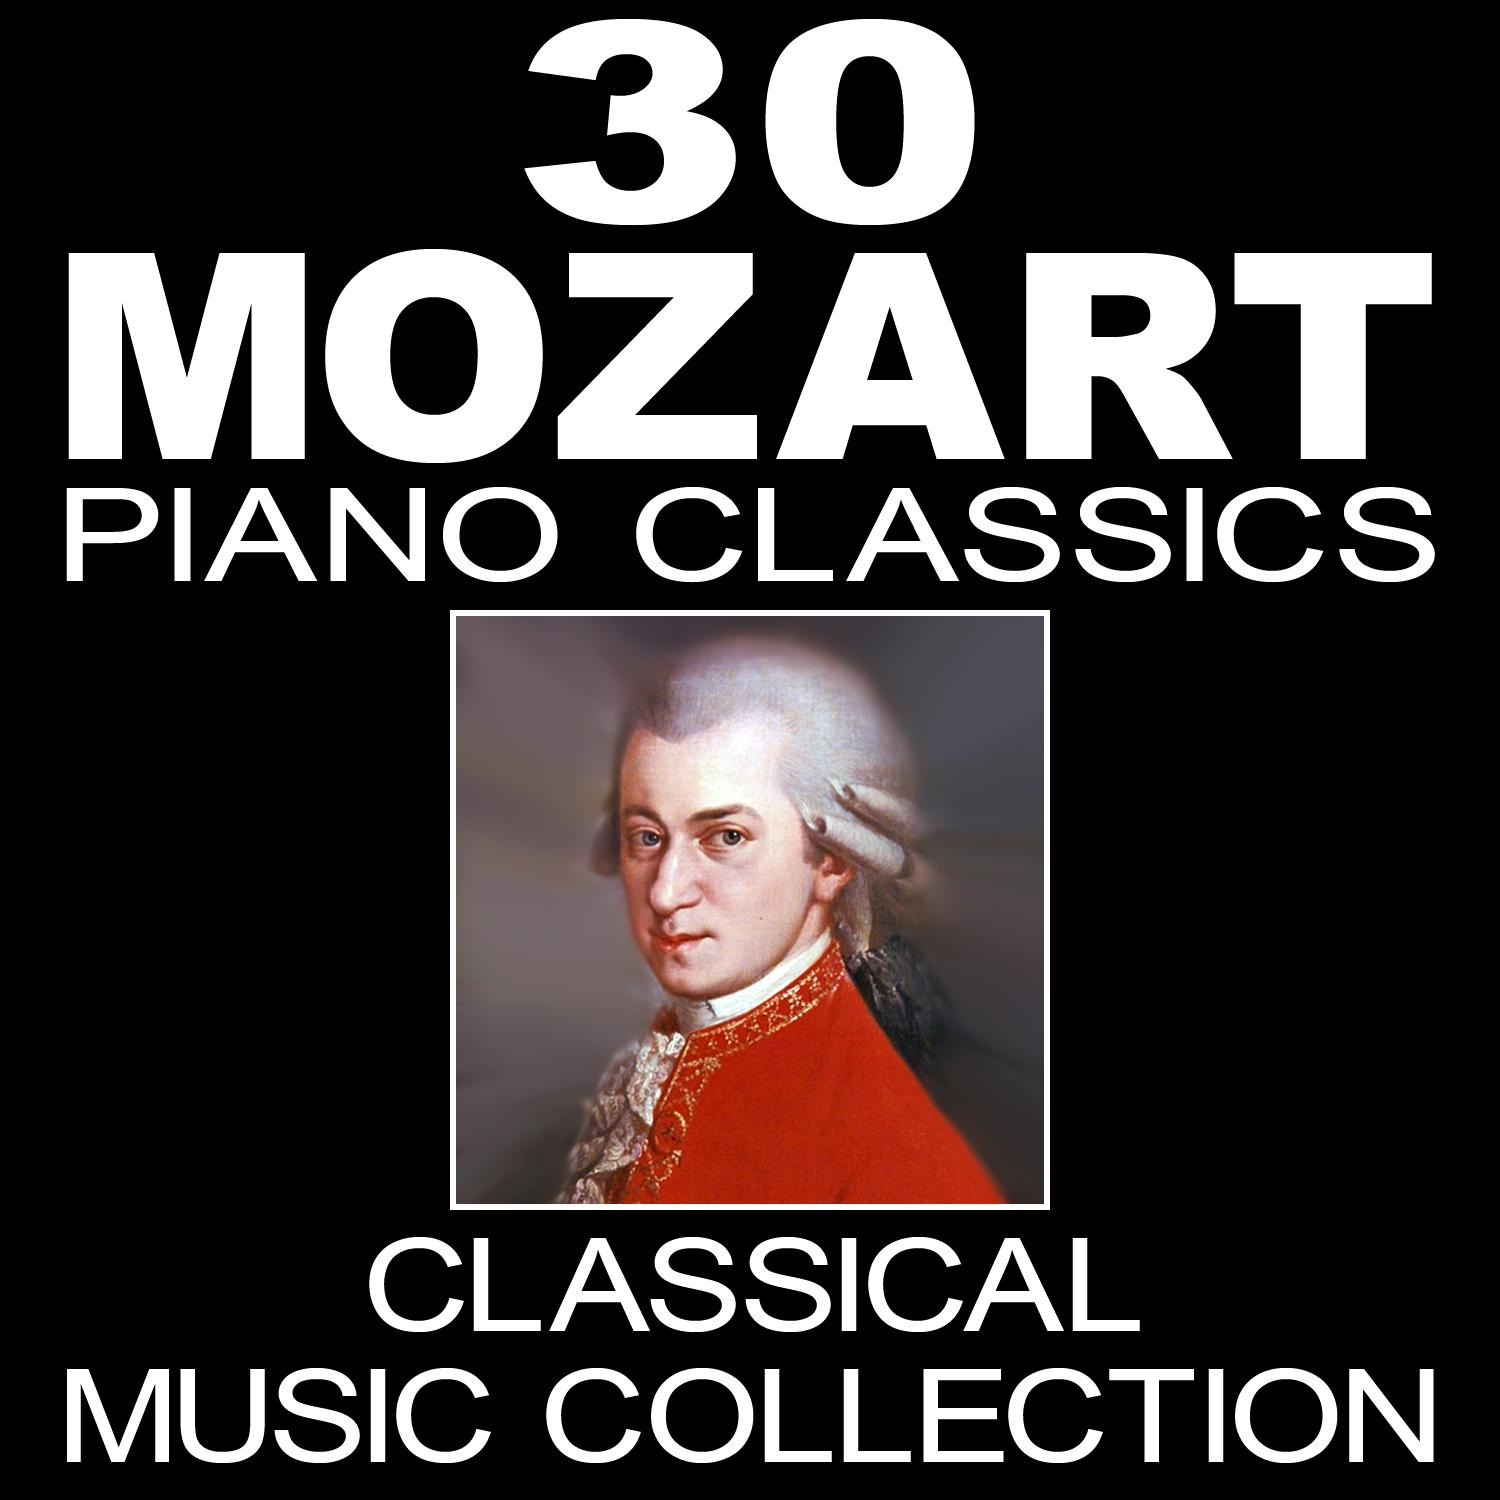 30 Mozart Piano Classics (Classical Music Collection)